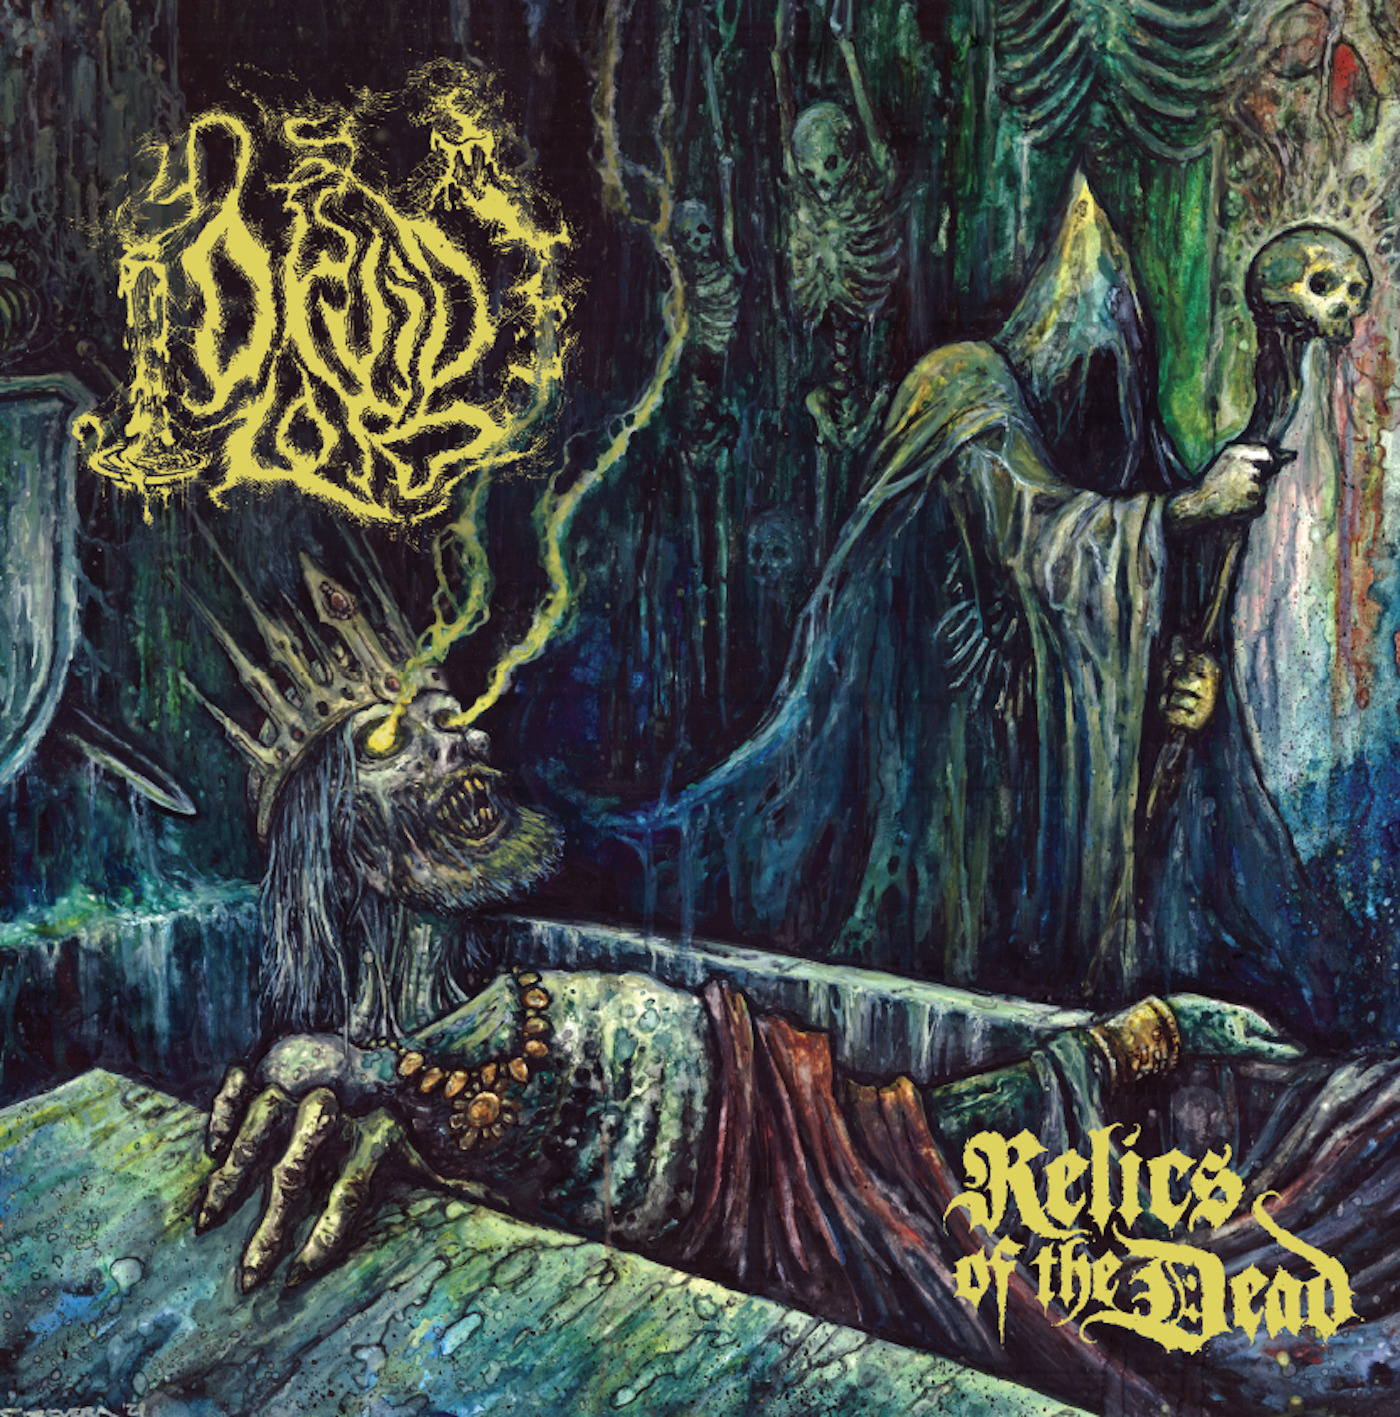 Druid-Lord-Relics-of-the-Dead-01.jpg